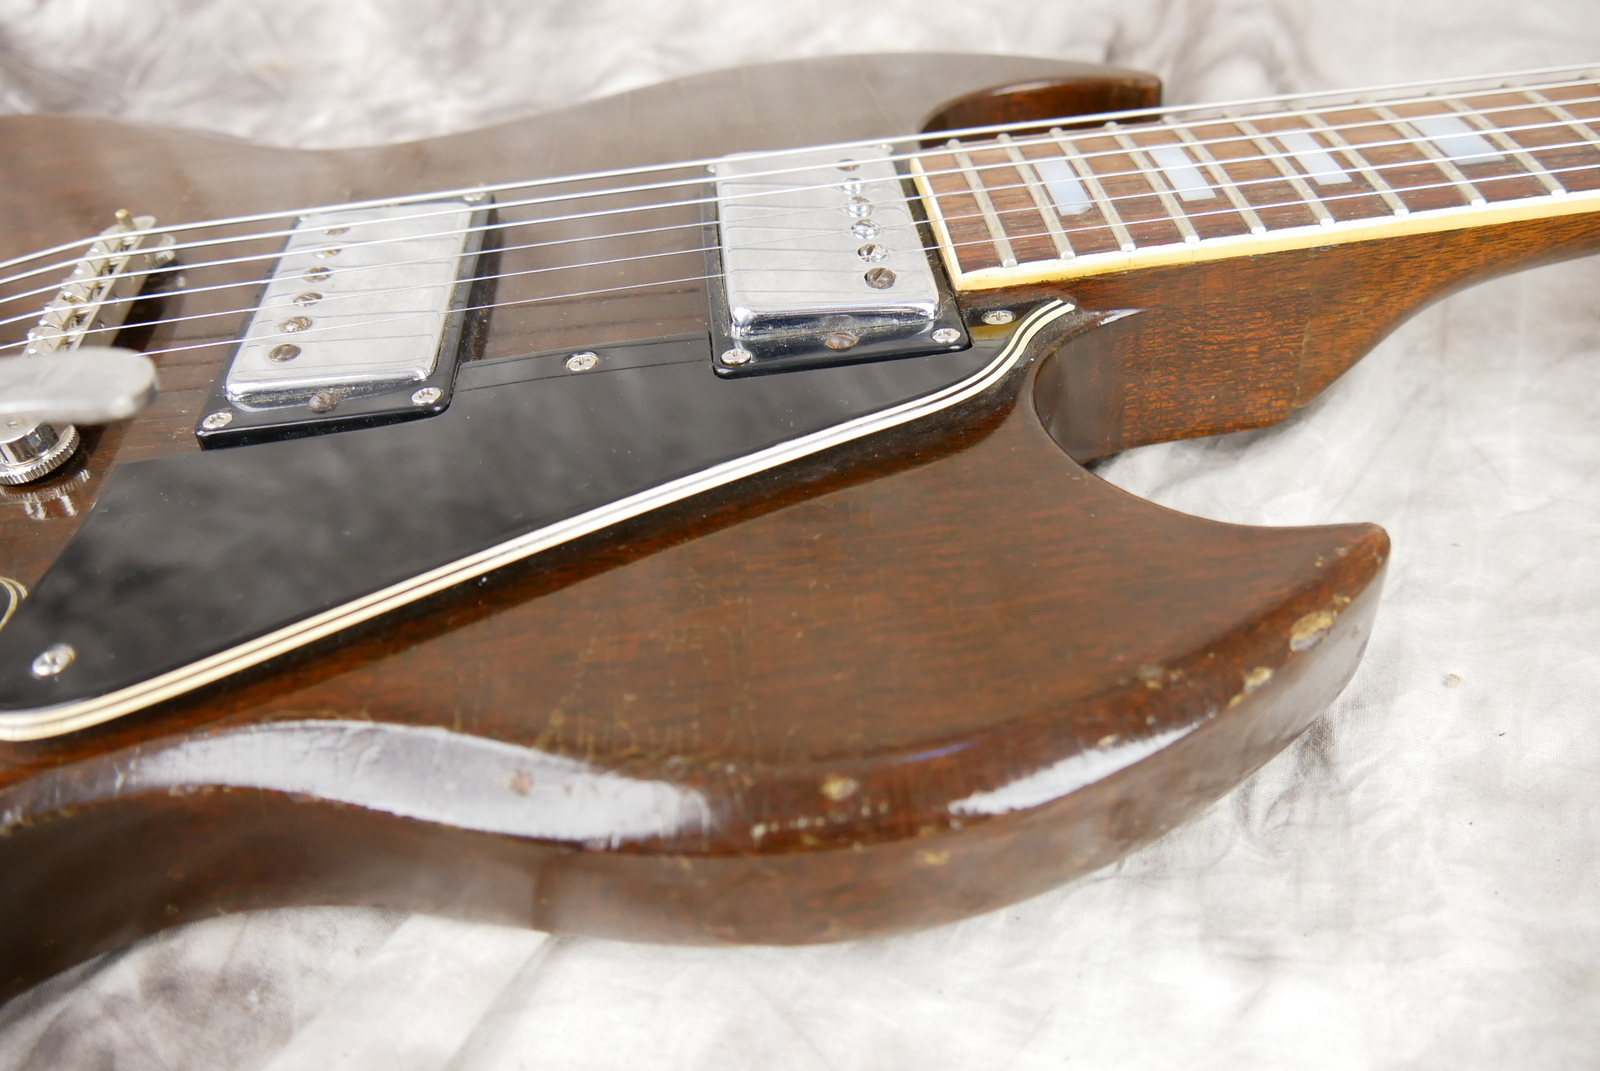 Gibson_SG_Deluxe_bigsby_1971_1972_walnut_cts-pots_1966-019.JPG